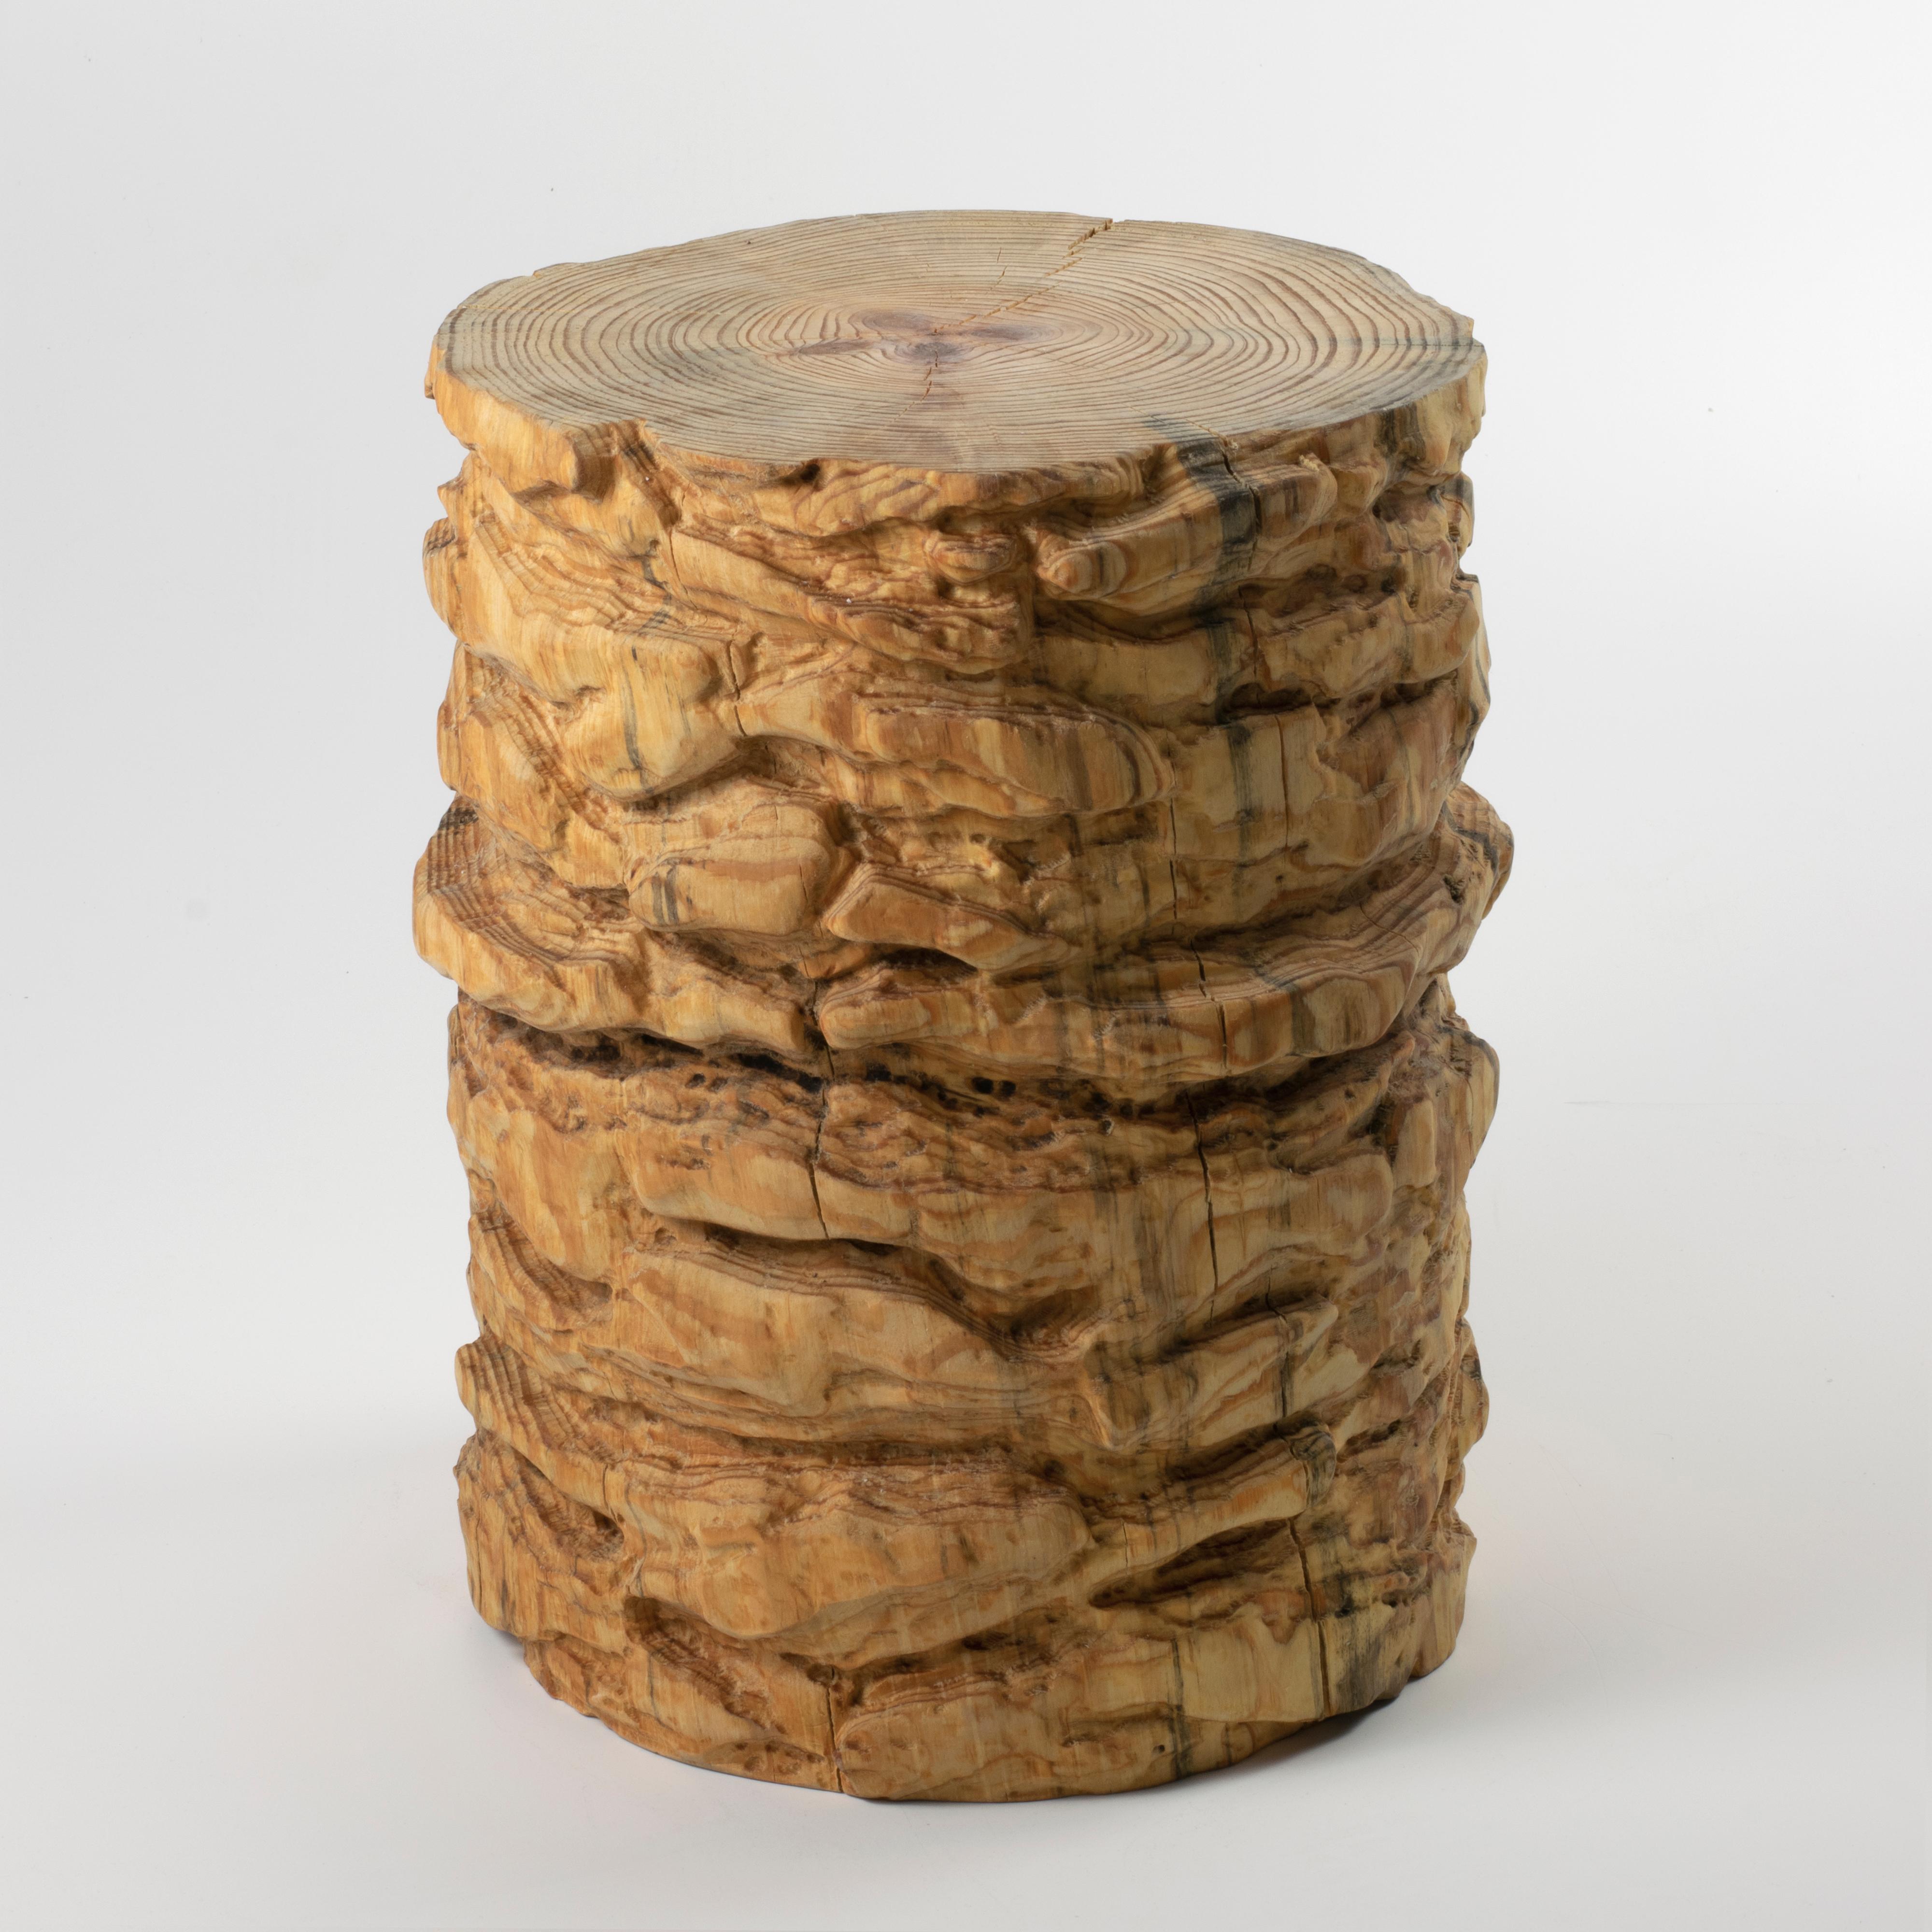 These wooden stools are digitally fabricated by artist Ezra Ardolino at Timbur LLC. 

The process consists of pine bark displacement data mapped to a cylindrical form; zero, forty-five and ninety degree rotations. Robotically machined in kiln dried